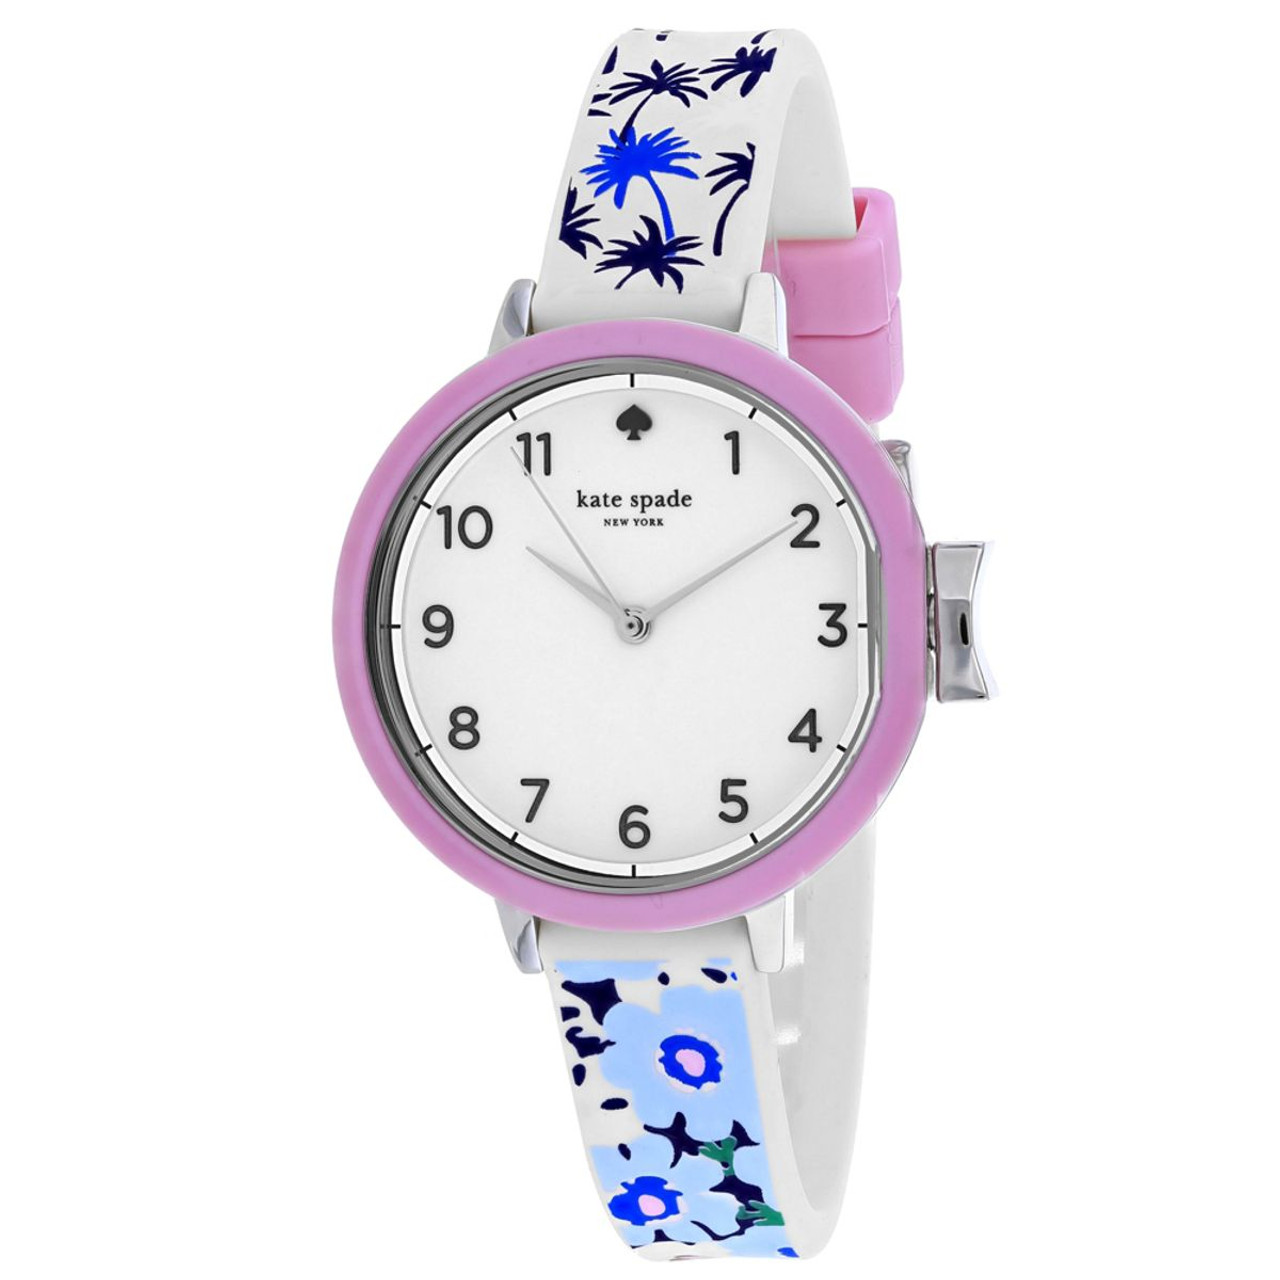 Kate Spade Women's Holland White Dial Watch product image